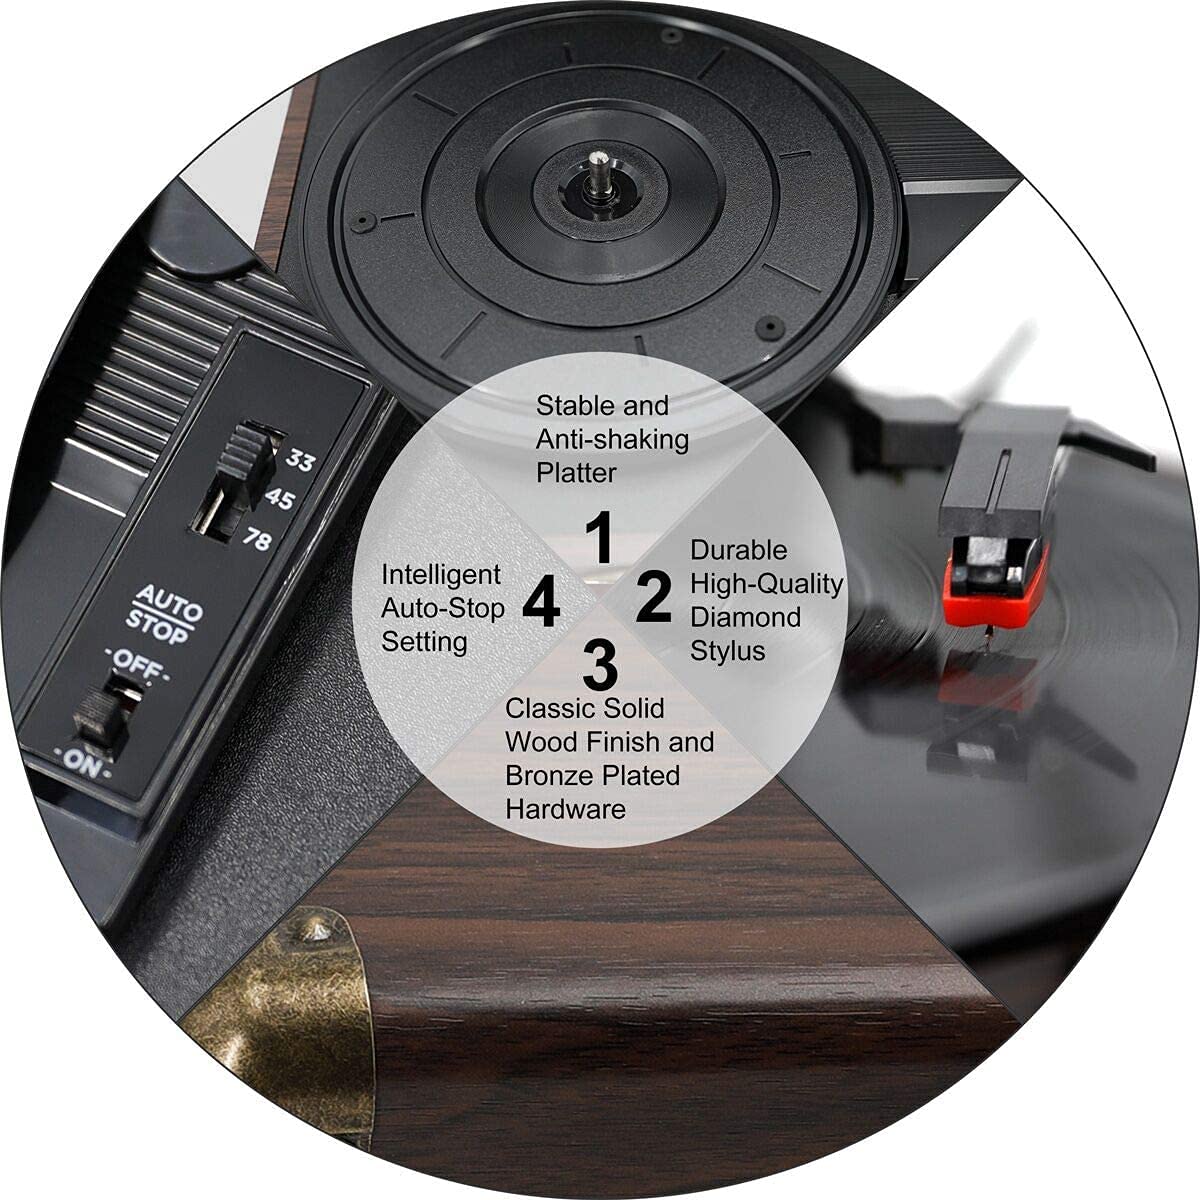 CLAW Stag Portable - Turntable with Built-in Stereo Speakers (Brown Wood) (Use Code Origin5 to Get 5% DIscount)